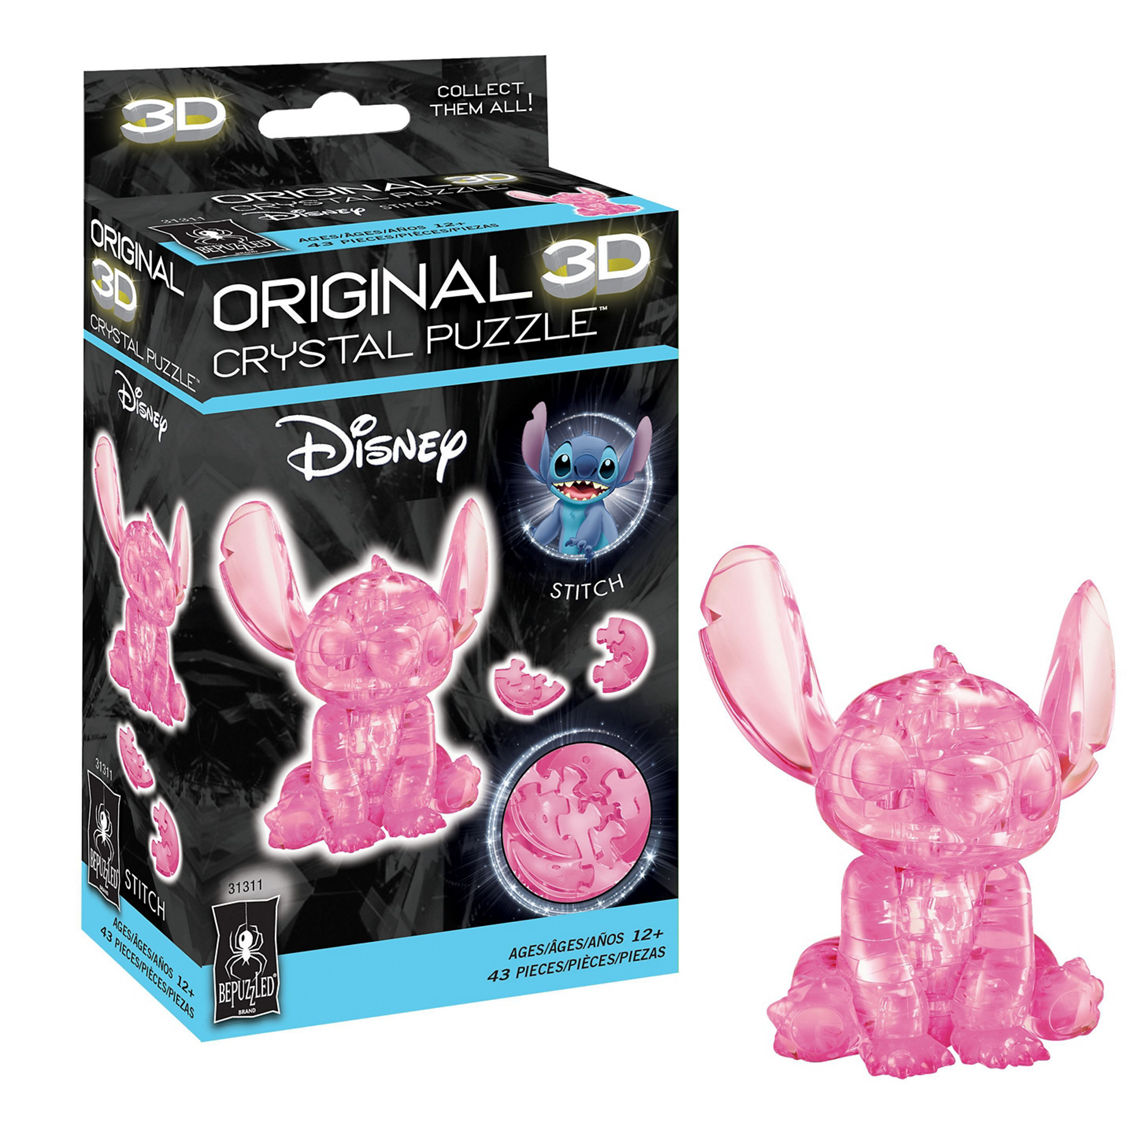 BePuzzled 3D Crystal Puzzle - Disney Stitch (Pink): 43 Pcs - Image 2 of 5